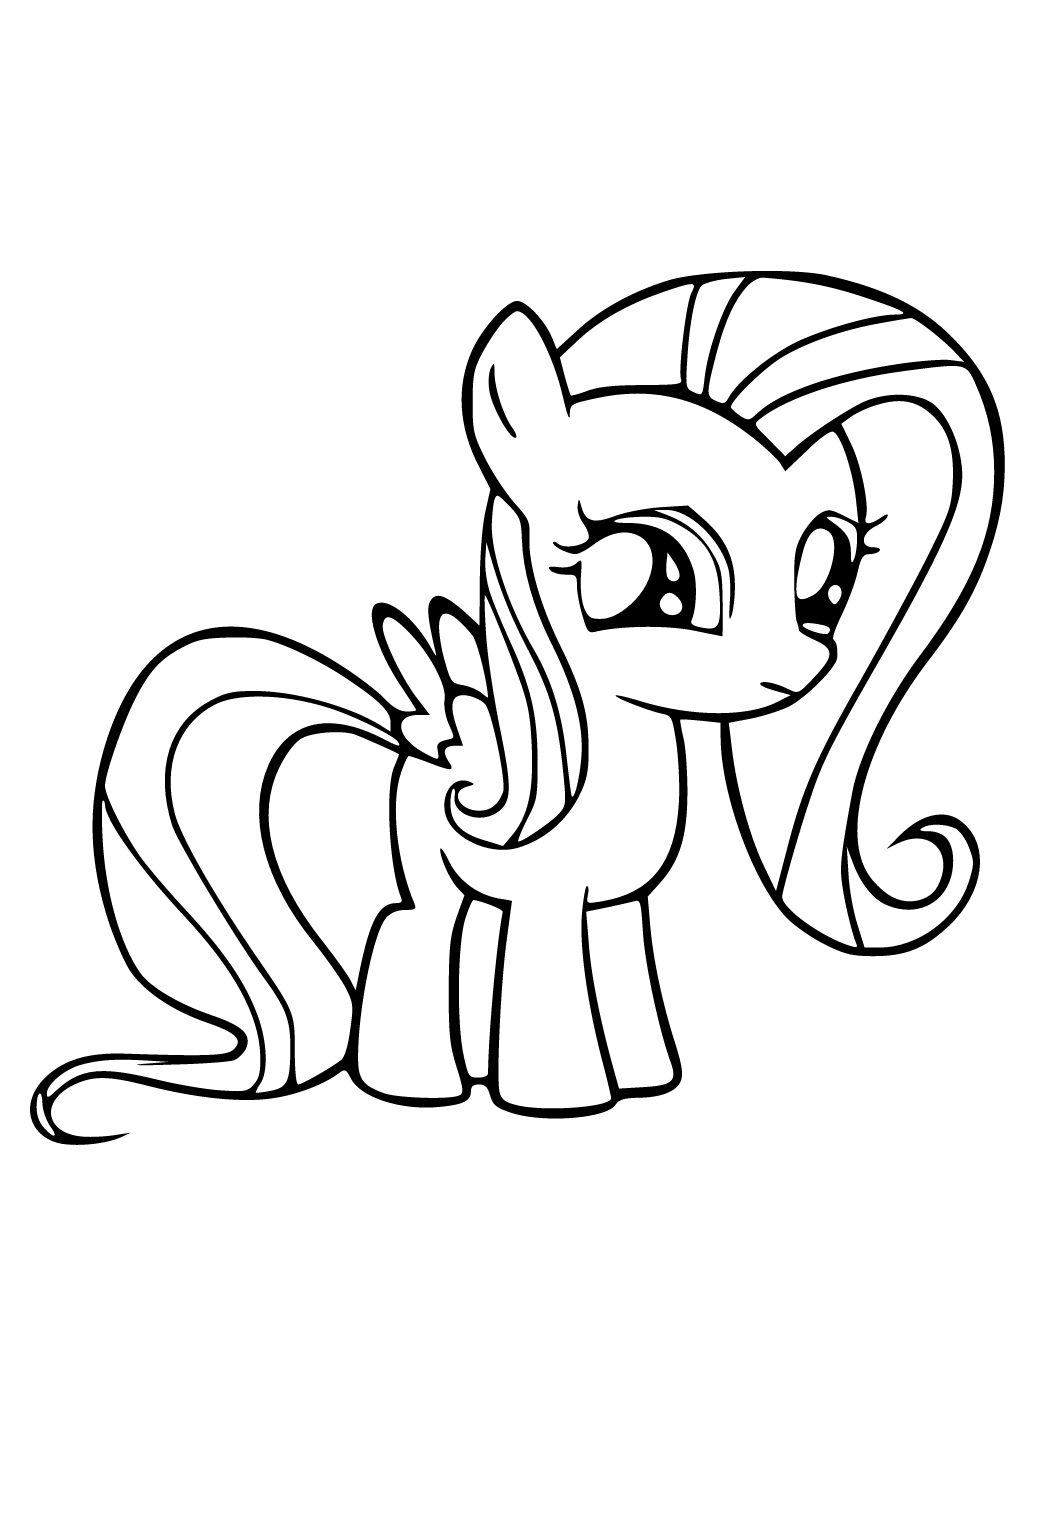 Free Printable My Little Pony Fluttershy Coloring Page, Sheet and ...